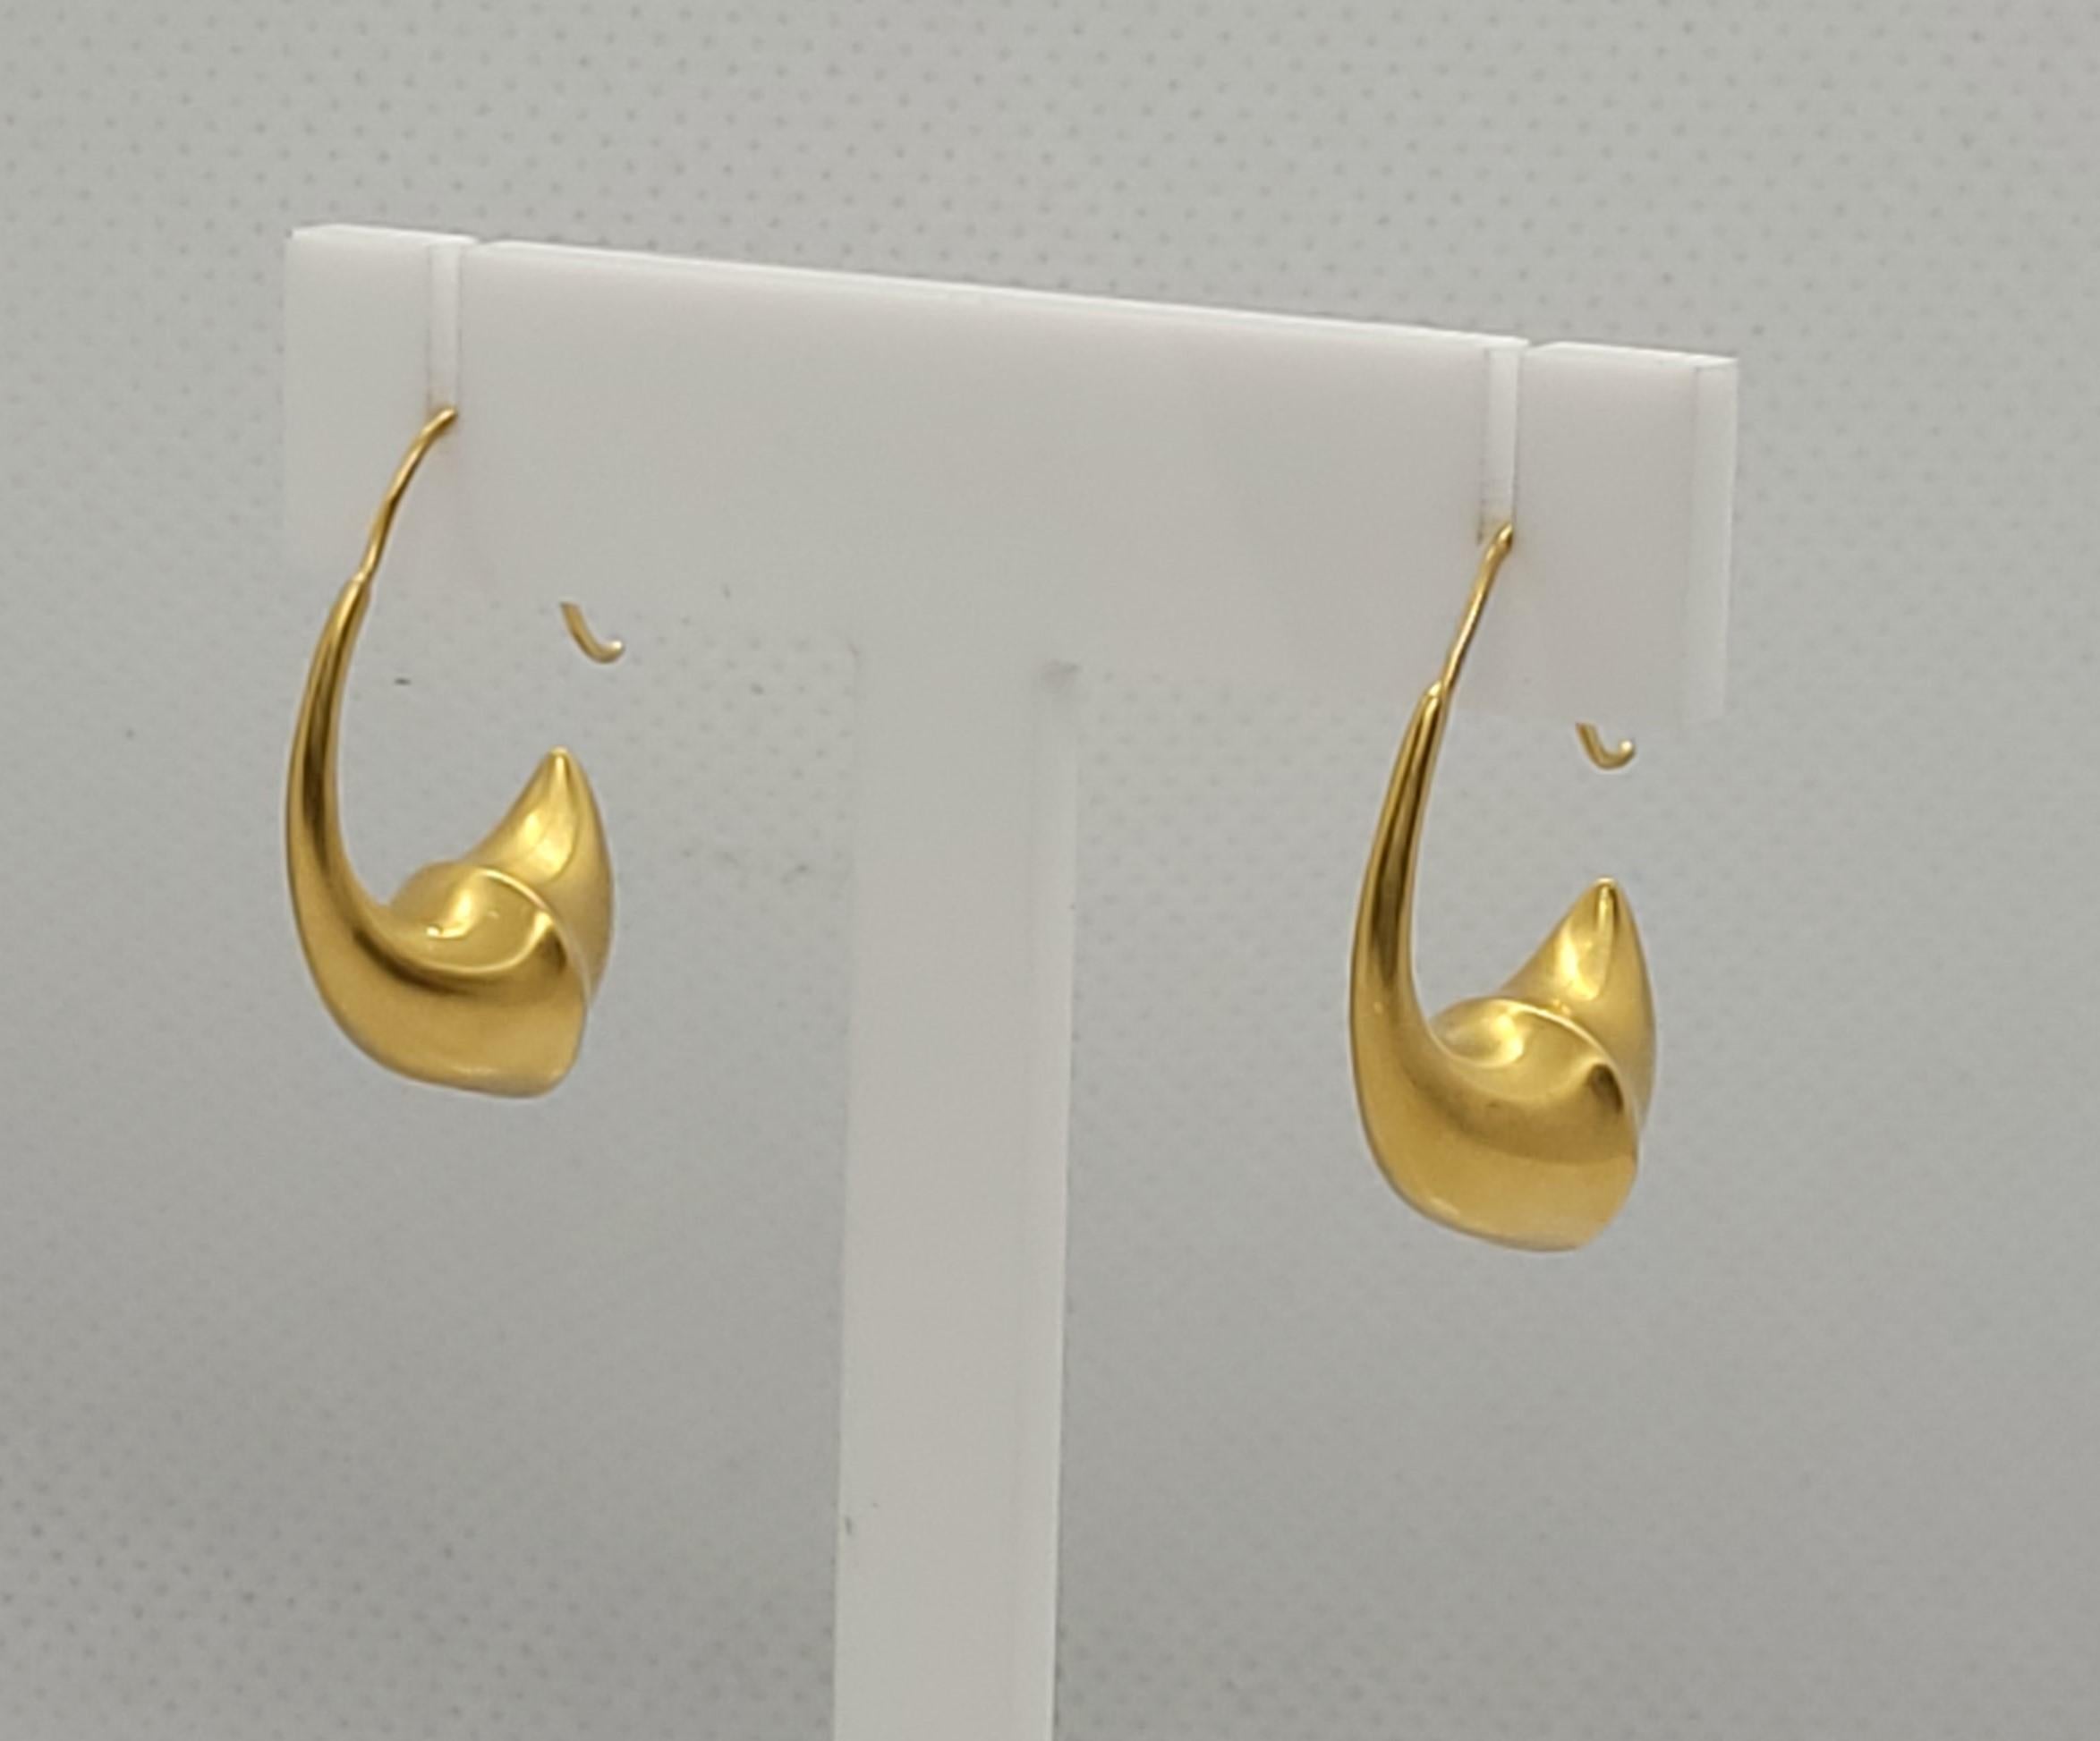 Lovely 14kt yellow gold hook-style earrings that are 27mm long, 9mm wide, stamped 585, and have a nice satin finish. Overall, these earrings are in very good condition. Please let us know if you have any questions. 

Rock N Gold Creations is located